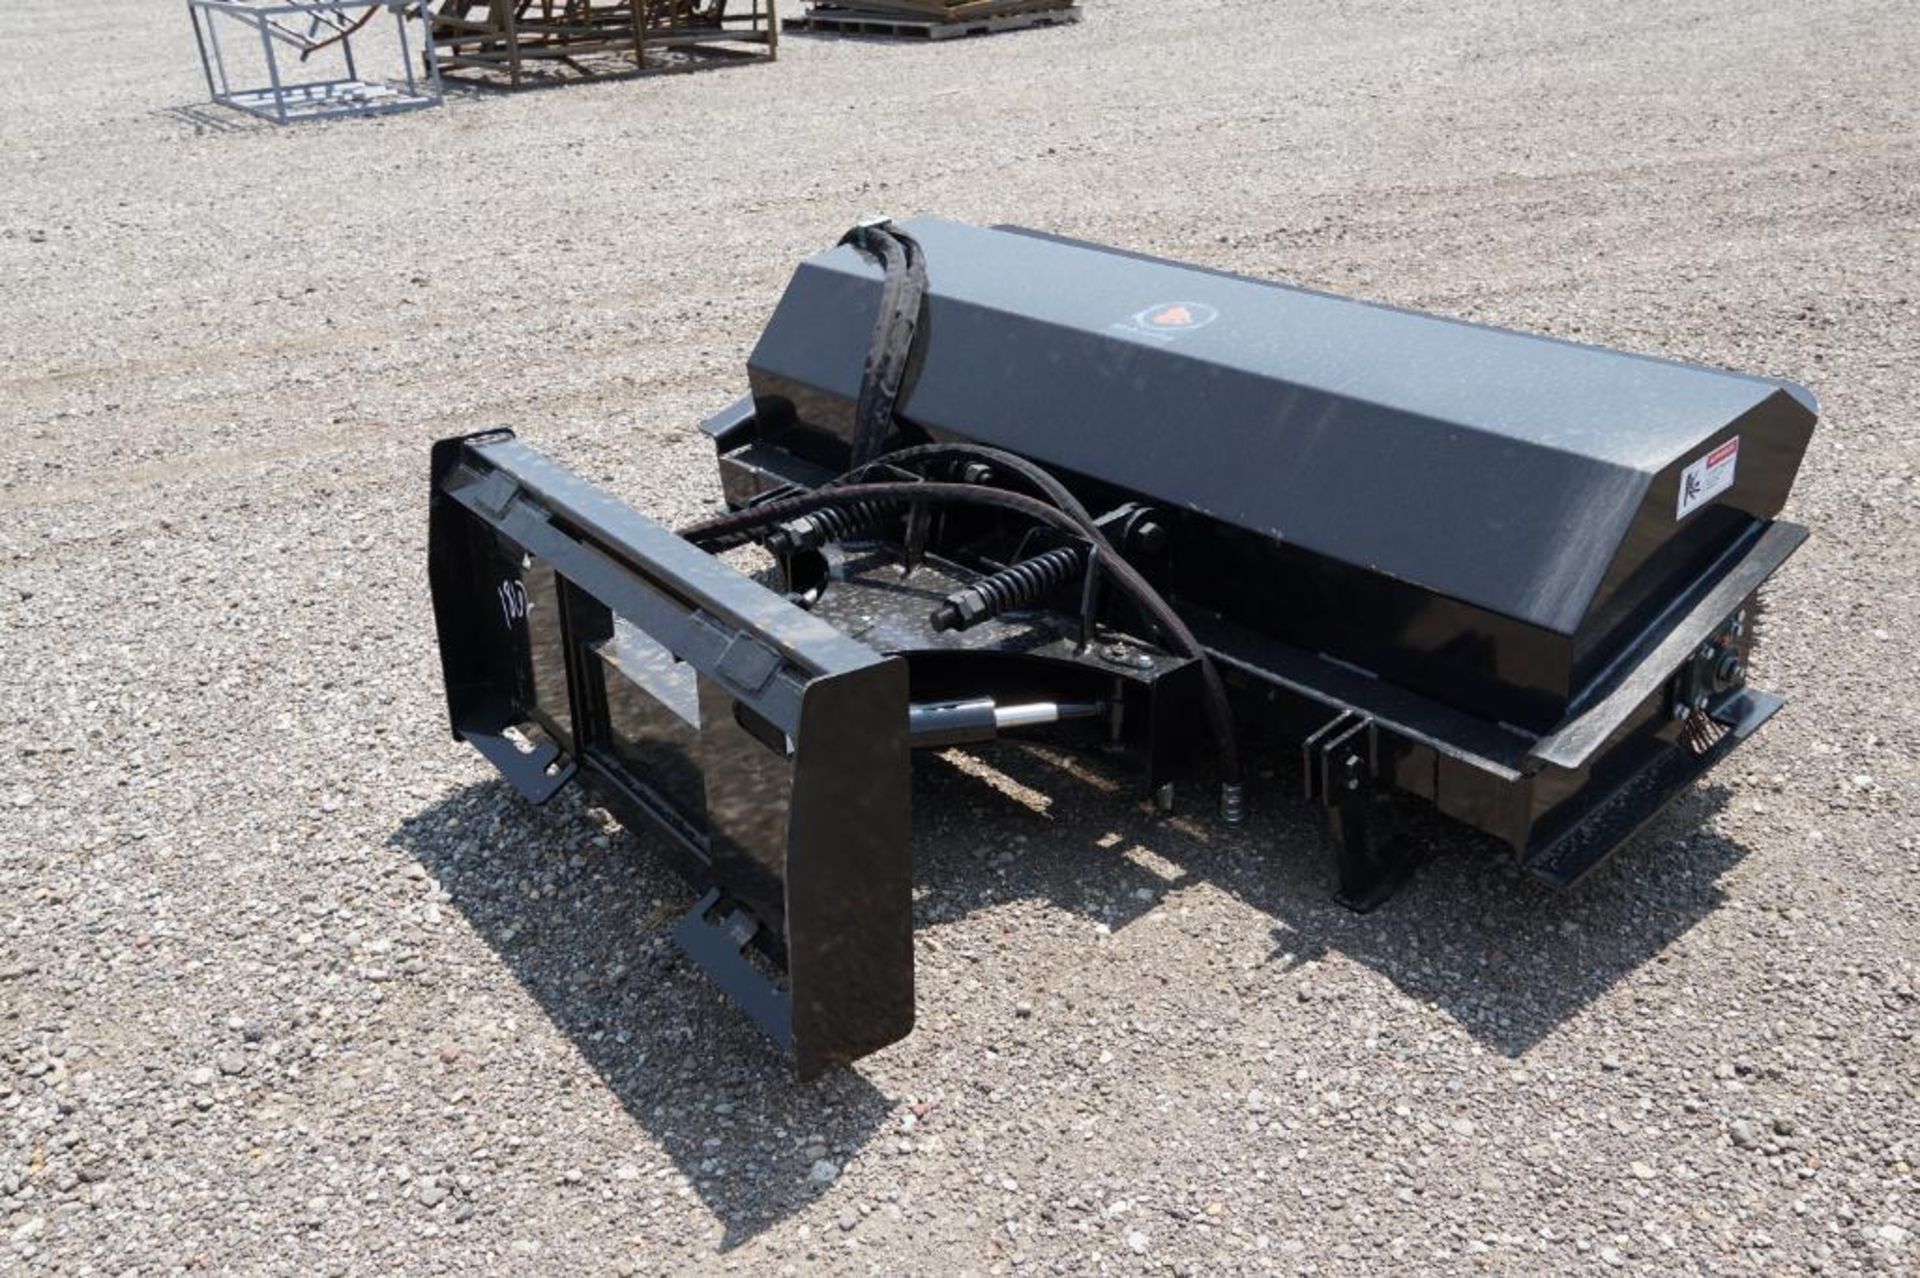 New! 2023 Wolverine Skid Steer Angle Broom Industrial Series Attachment - Image 3 of 5